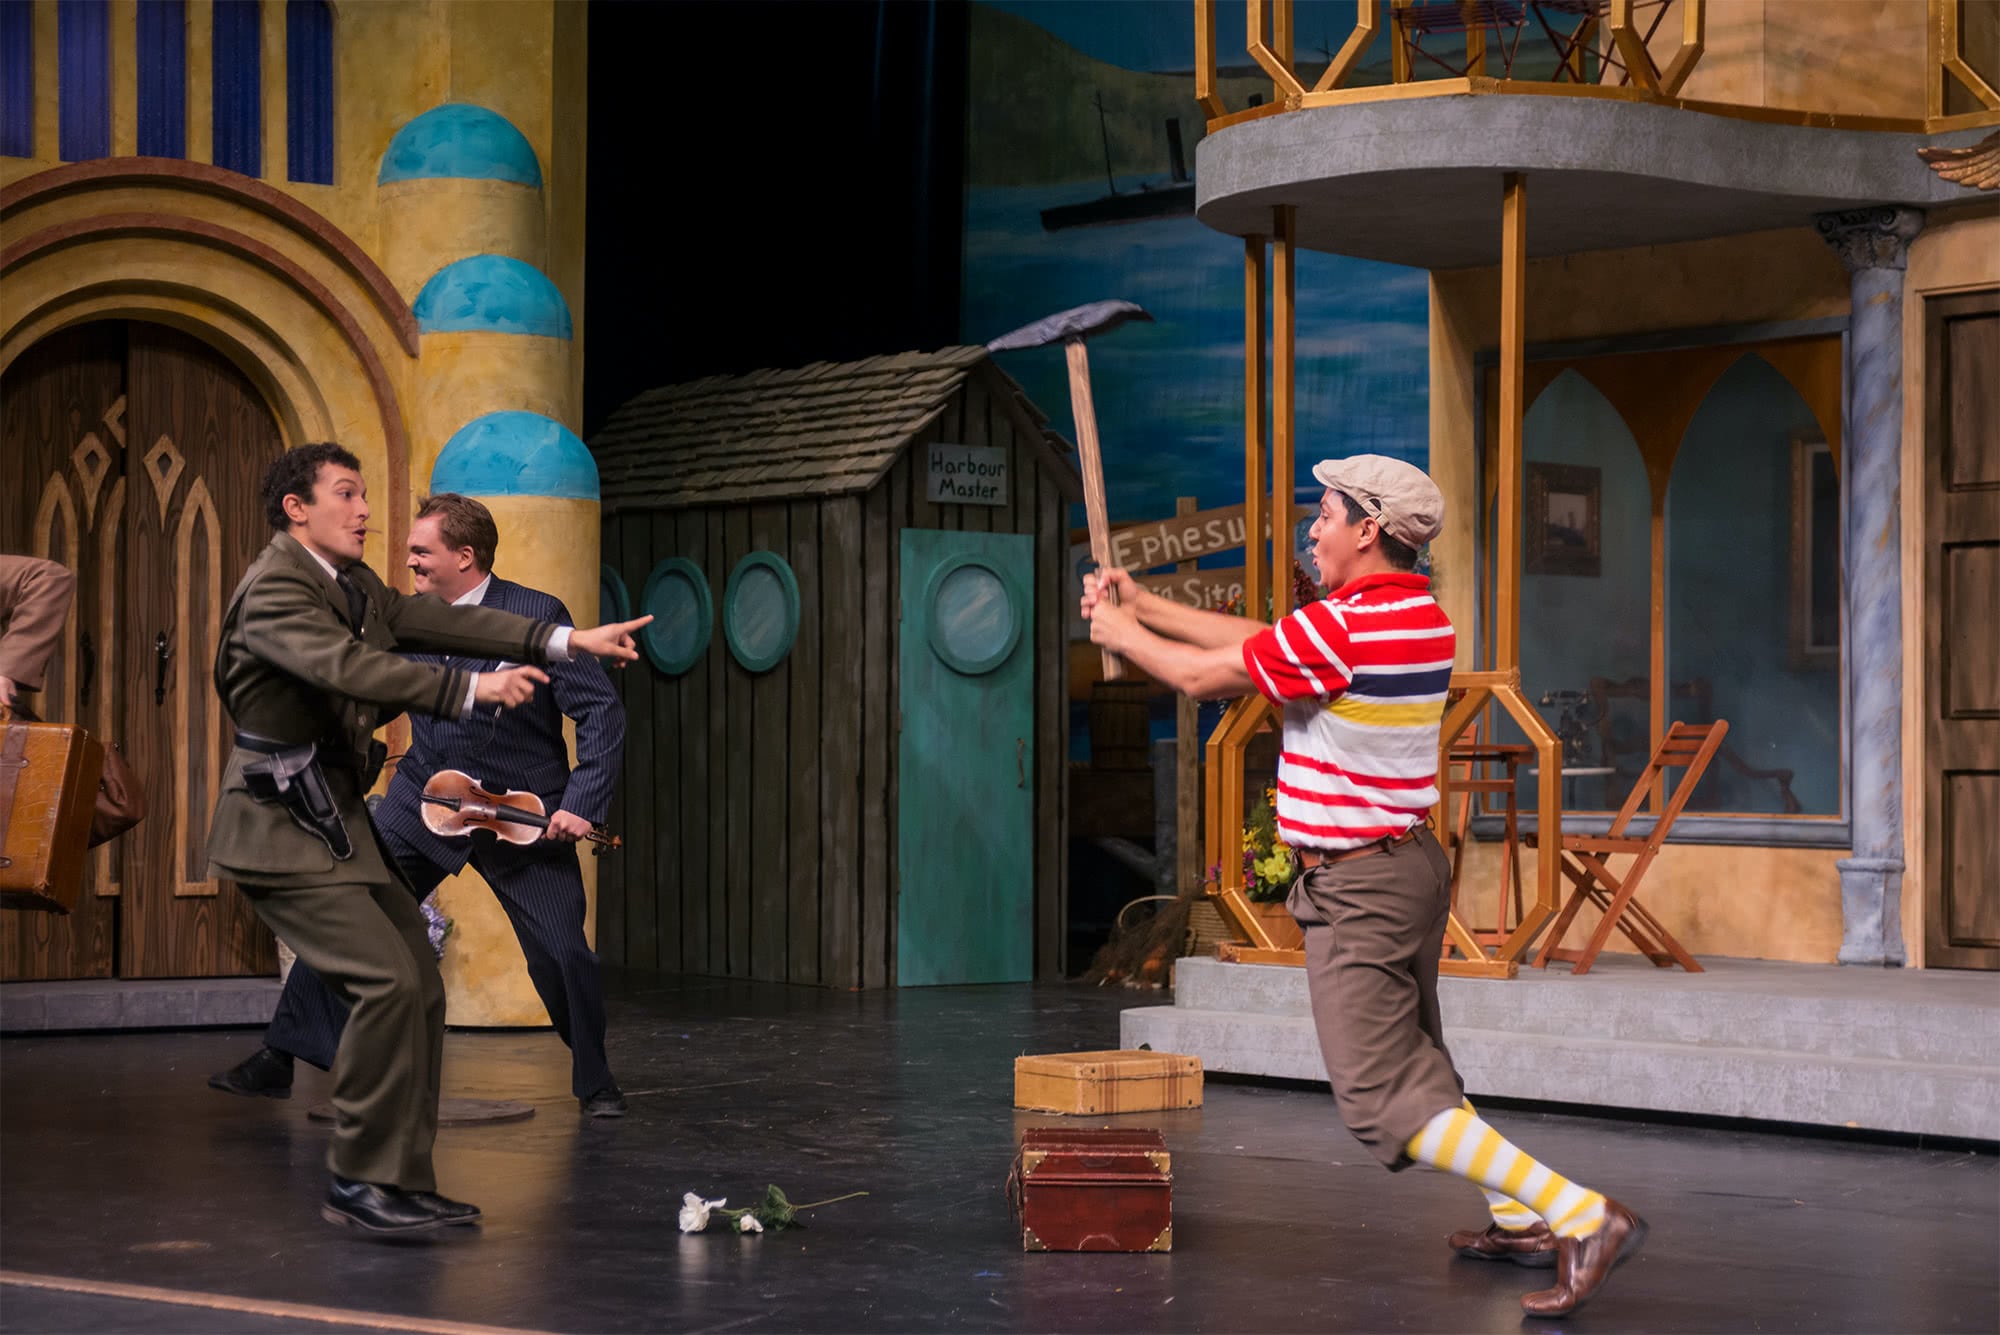 Comedy of errors characters fighting.